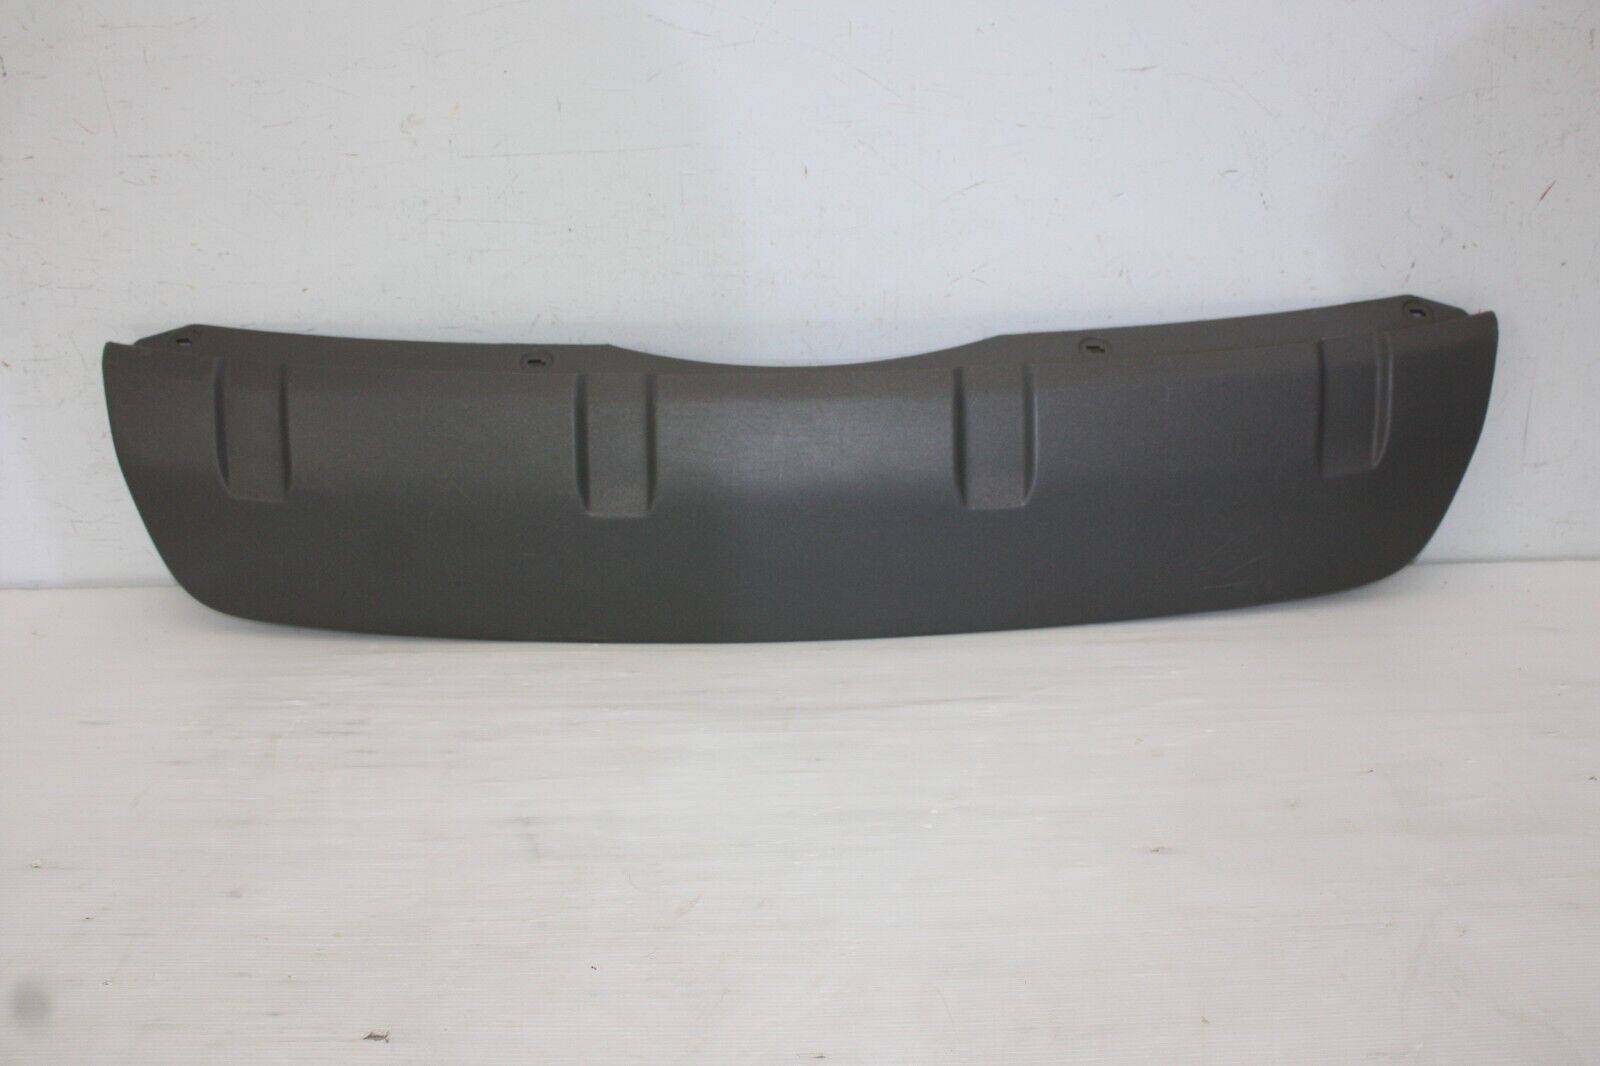 Land Rover Discovery Rear Bumper Tow Eye Cover 2017 ON HY32 17K950 AA Genuine 175585706077